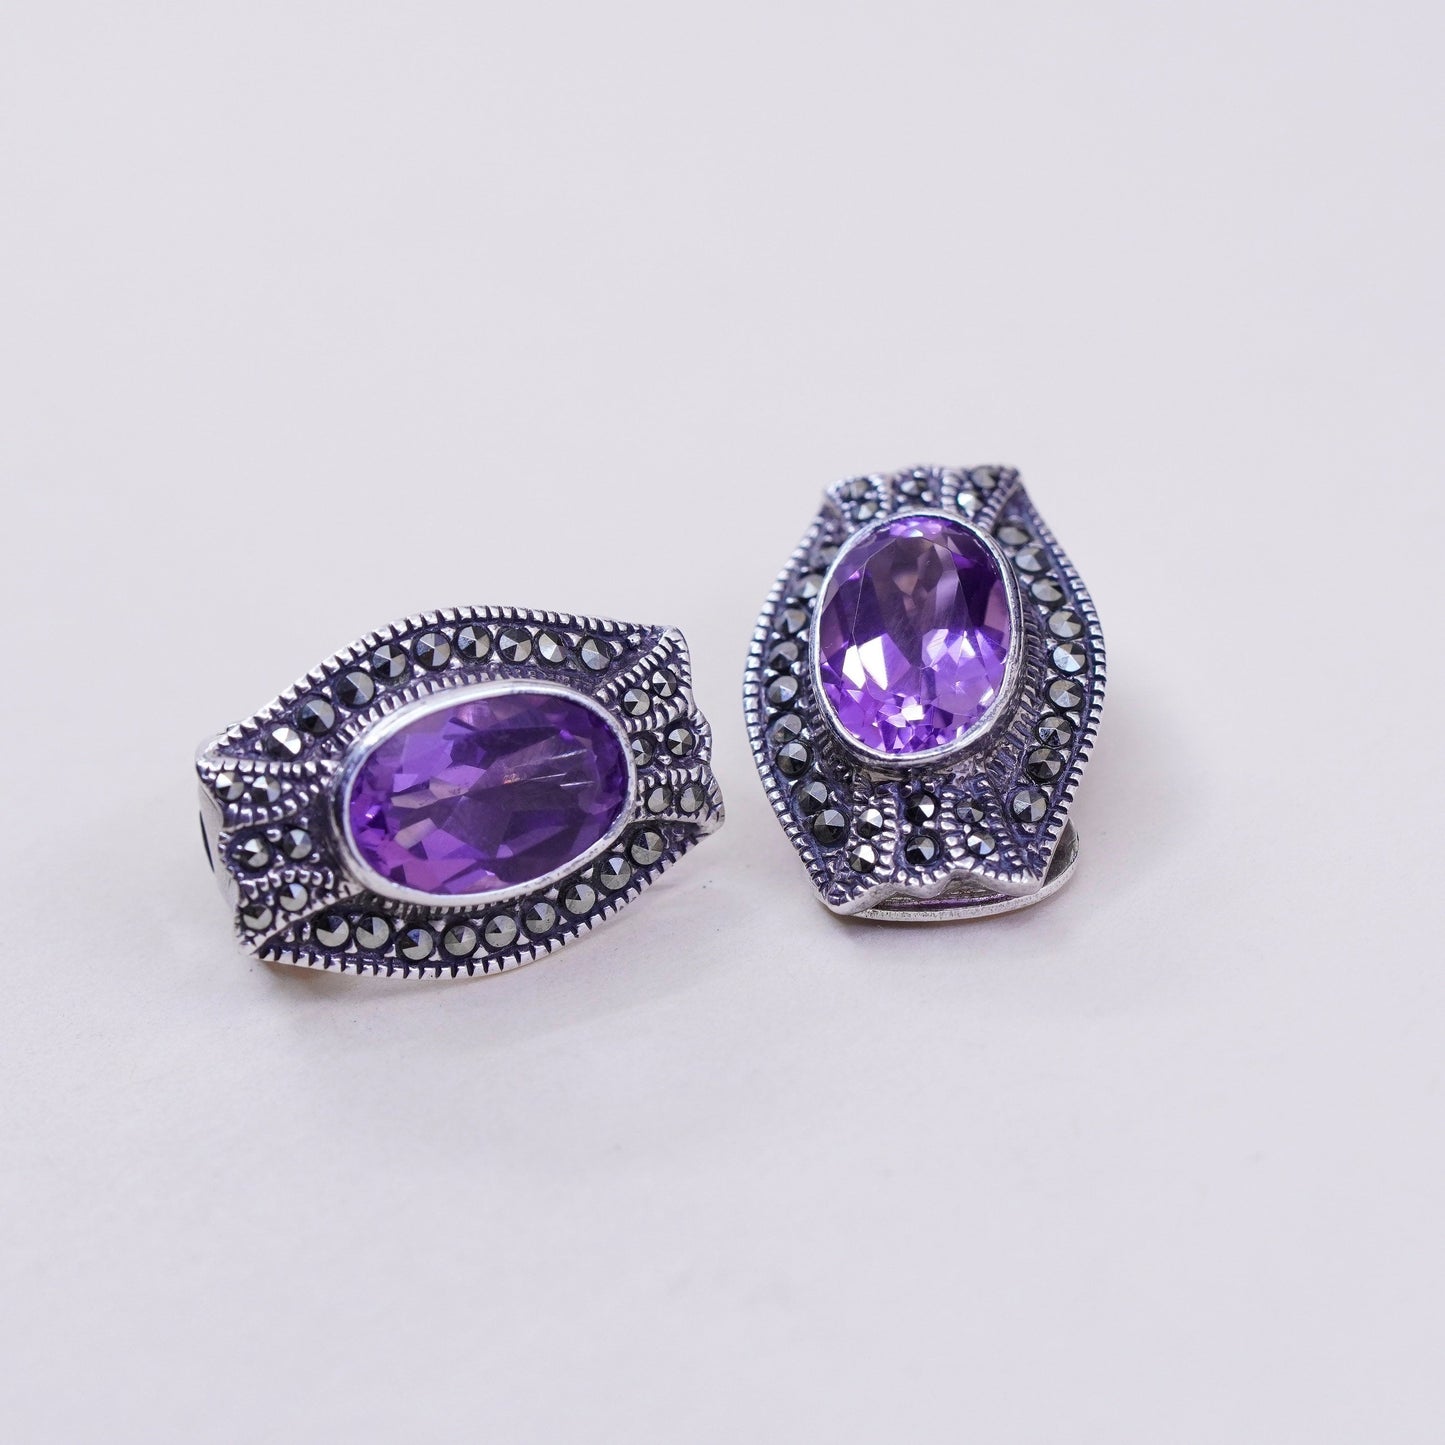 Vintage Sterling 925 silver handmade clip on earrings w/ amethyst and Marcasite